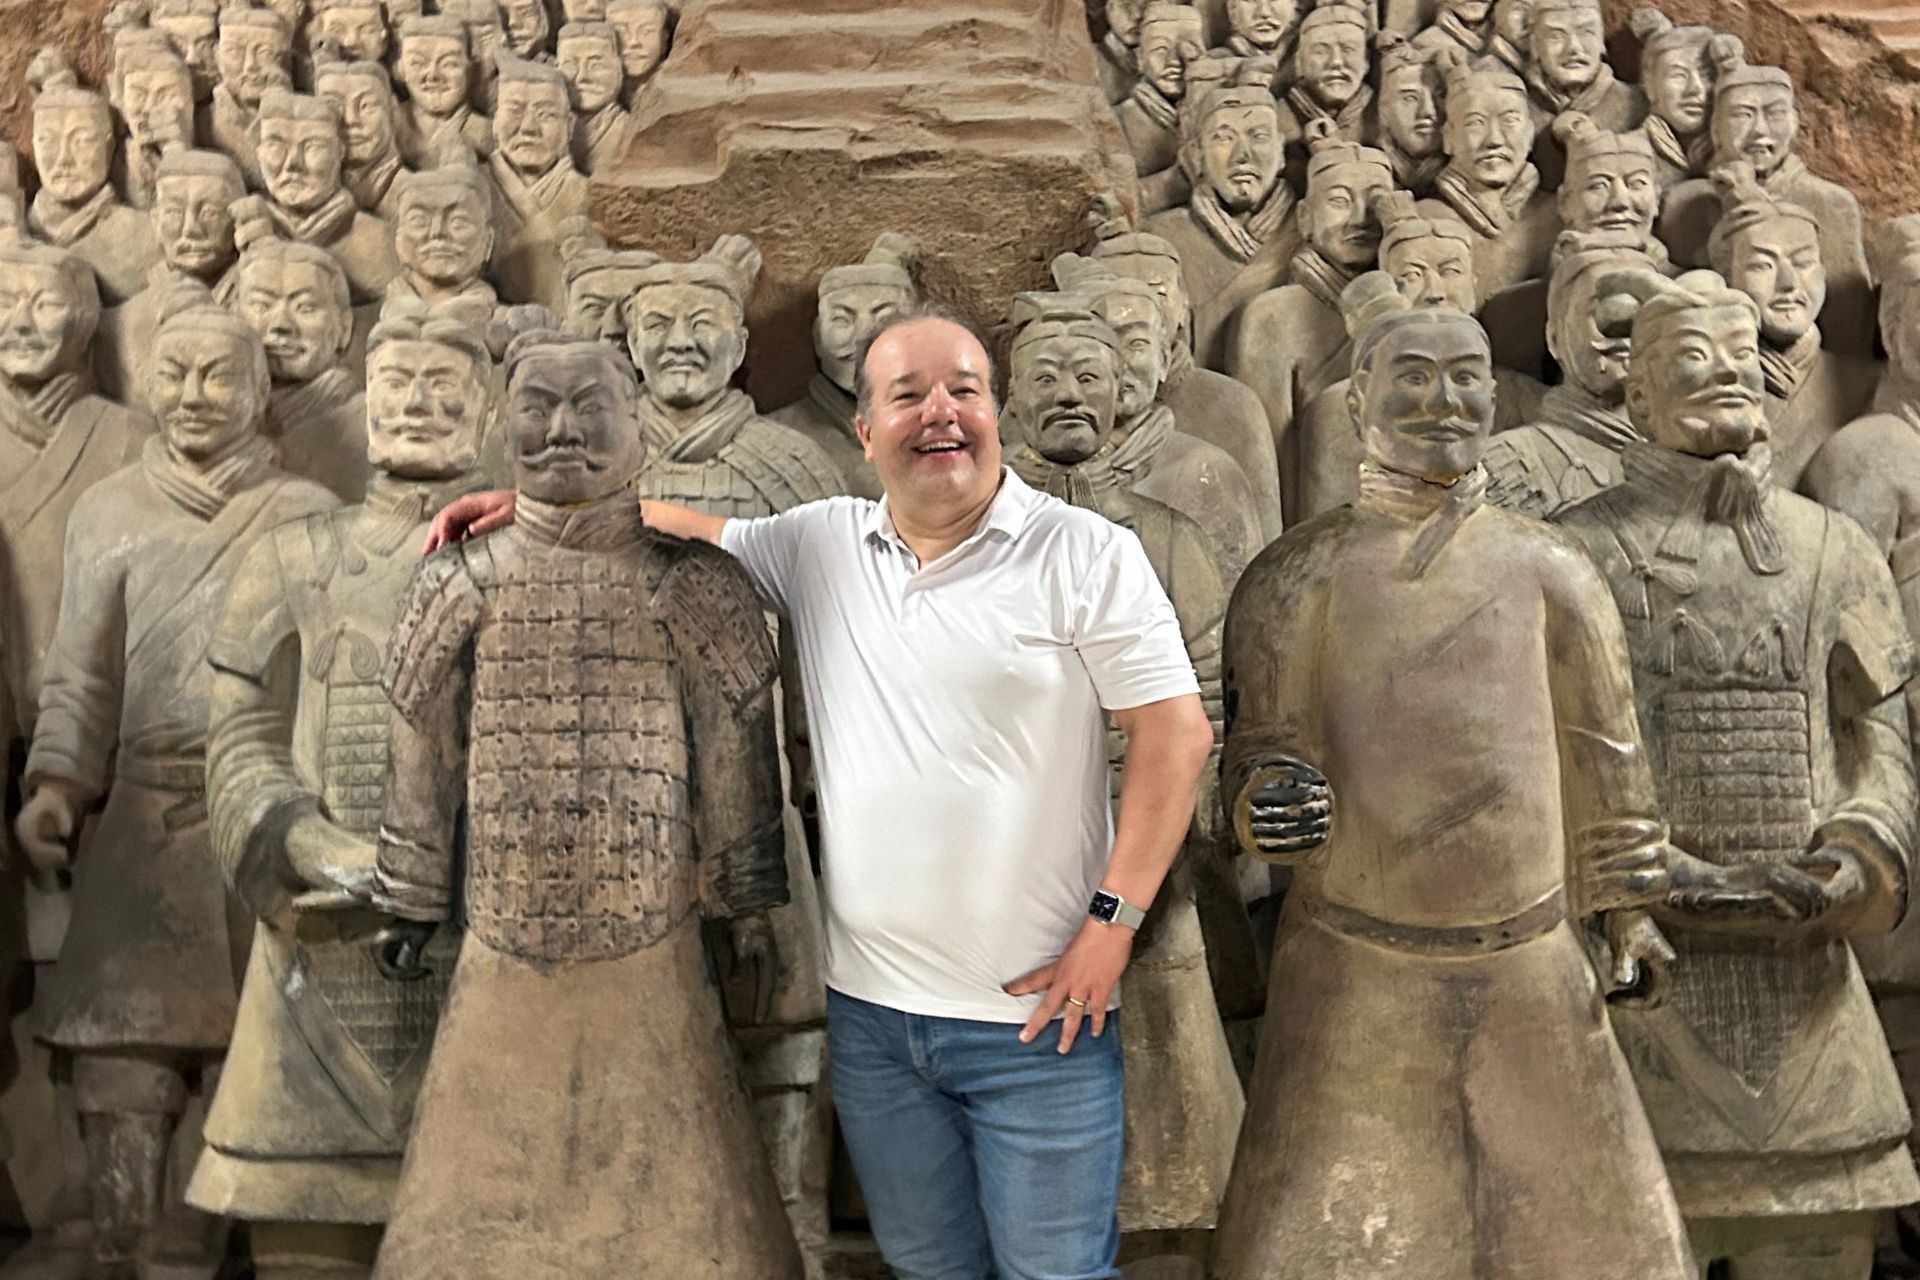 Ronaldo Candido da Silva Jr. by the Terracotta-Army in the Mausoleum of the First Qin Emperor.